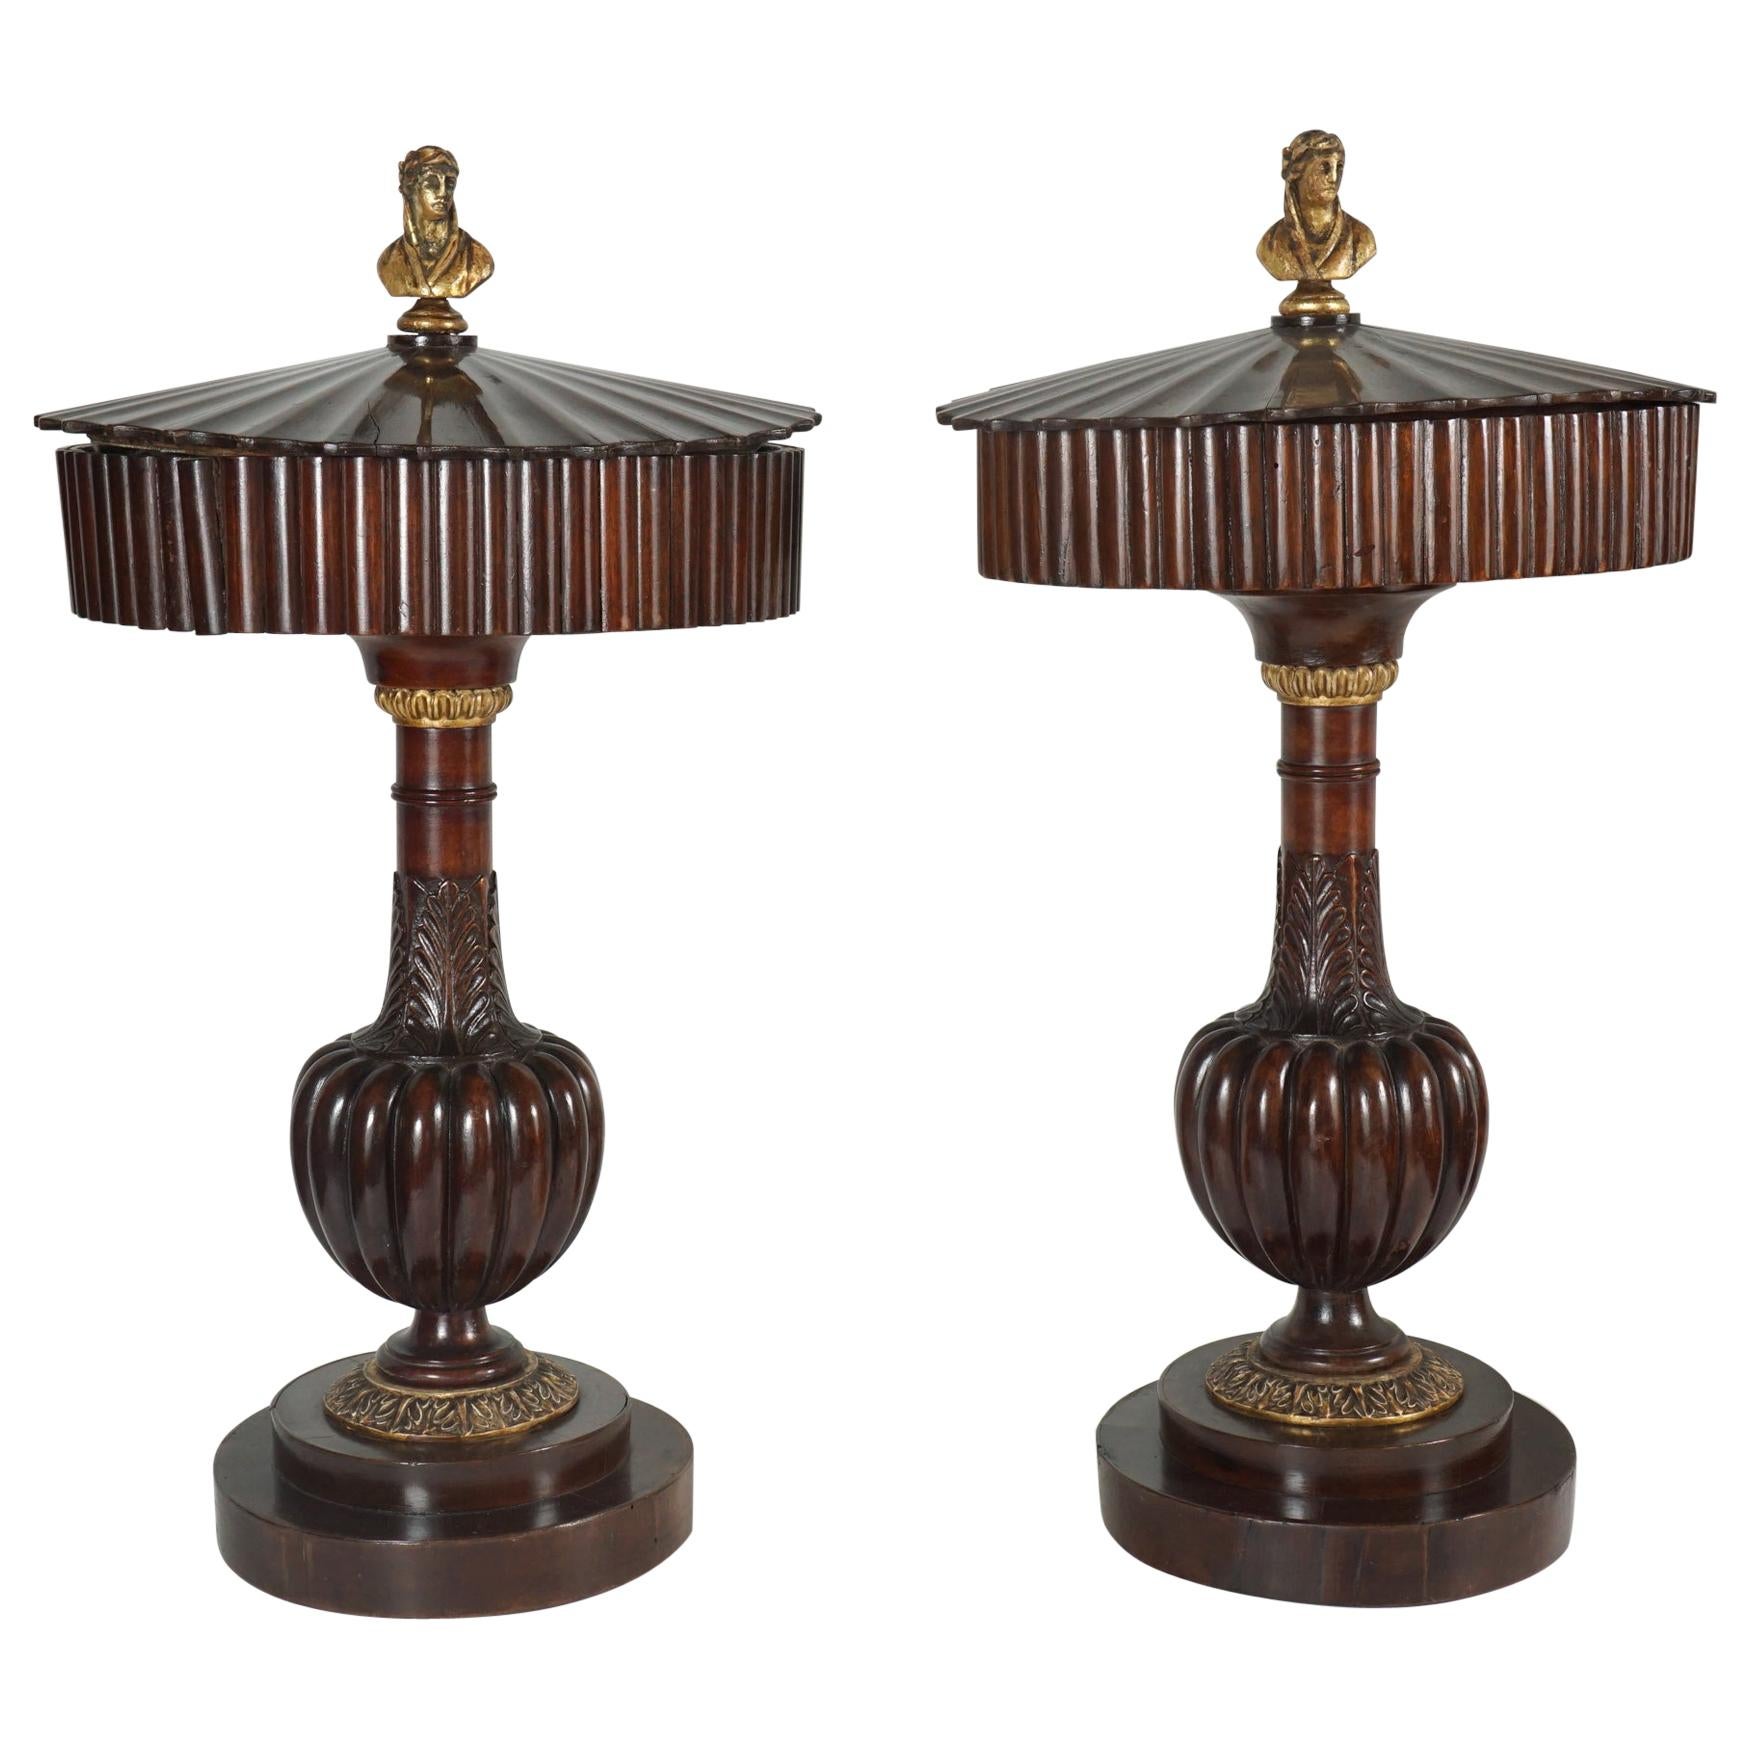 Pair of Early 19th Century Italian Wedding Boxes